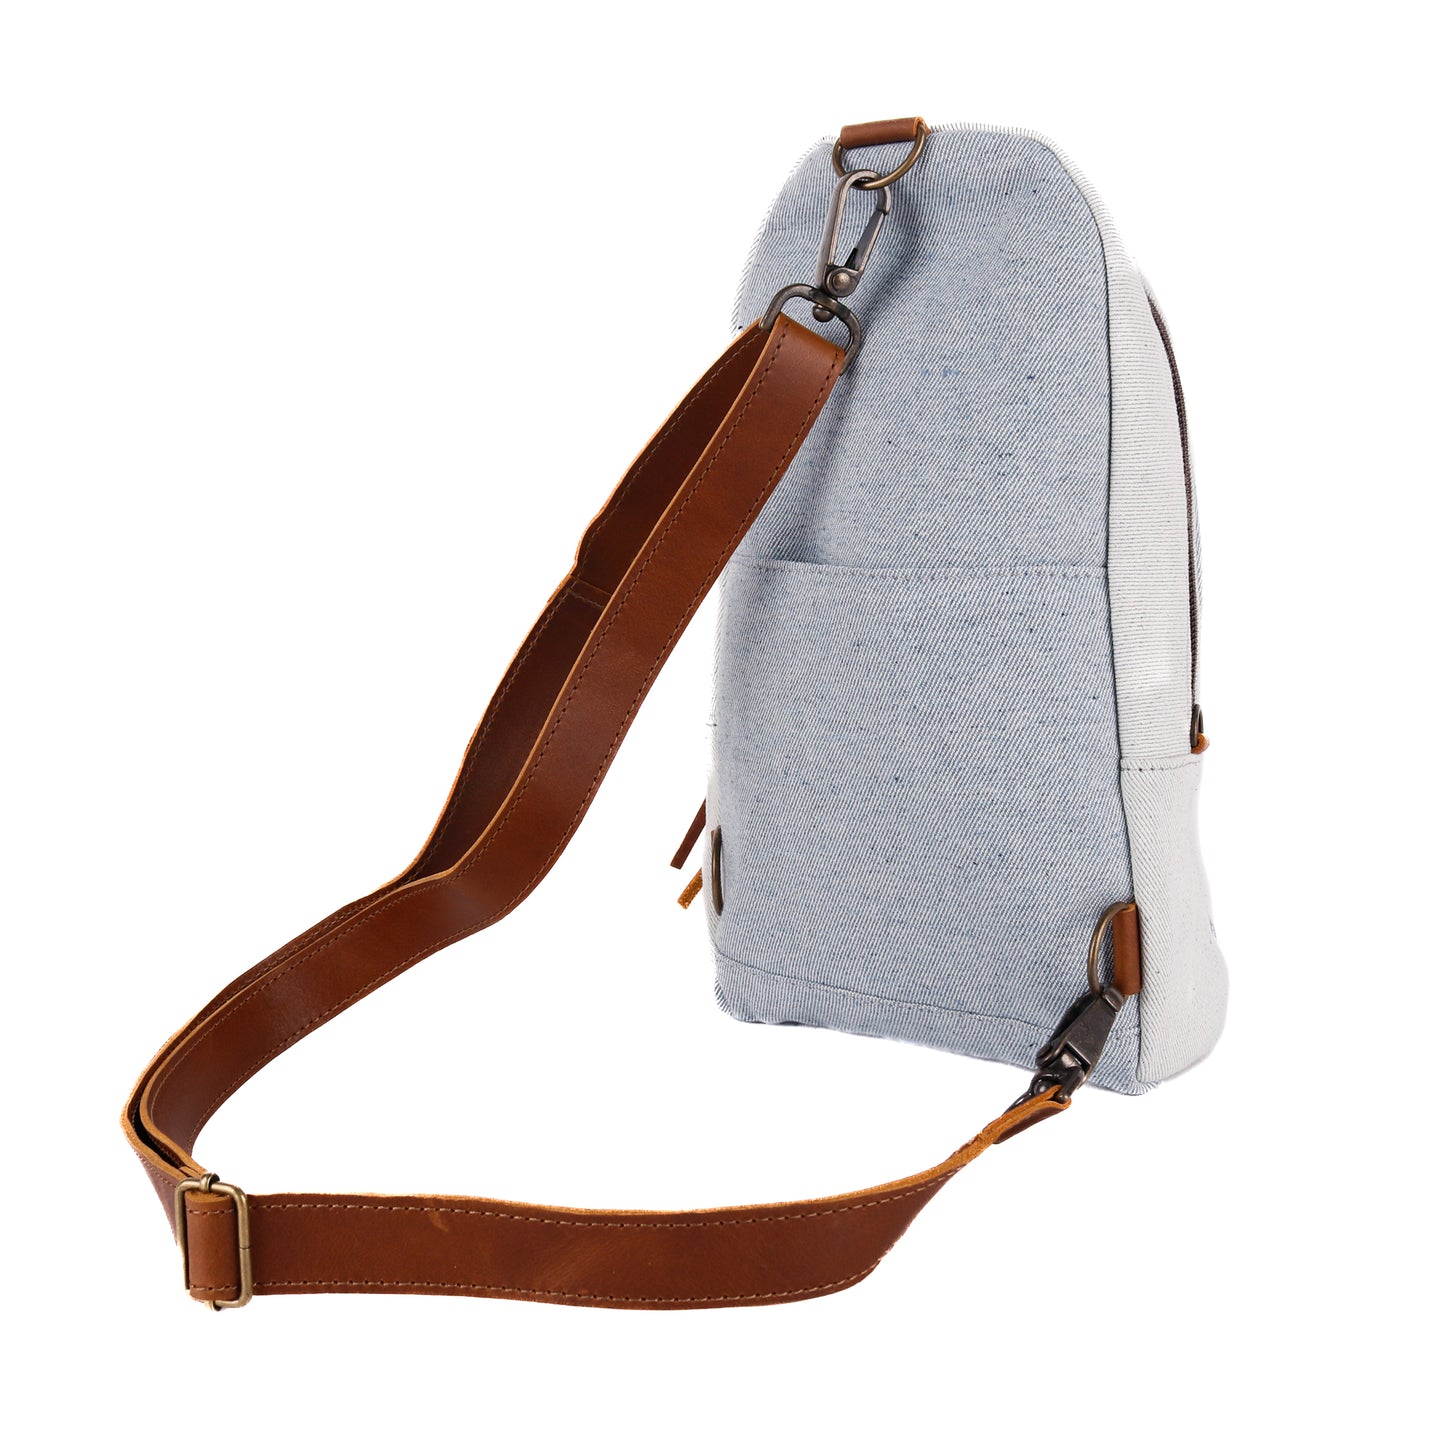 CROSSBODY SLING 2.0 - UPCYCLED DENIM WITH PATCH - CAFE - NO. 11332